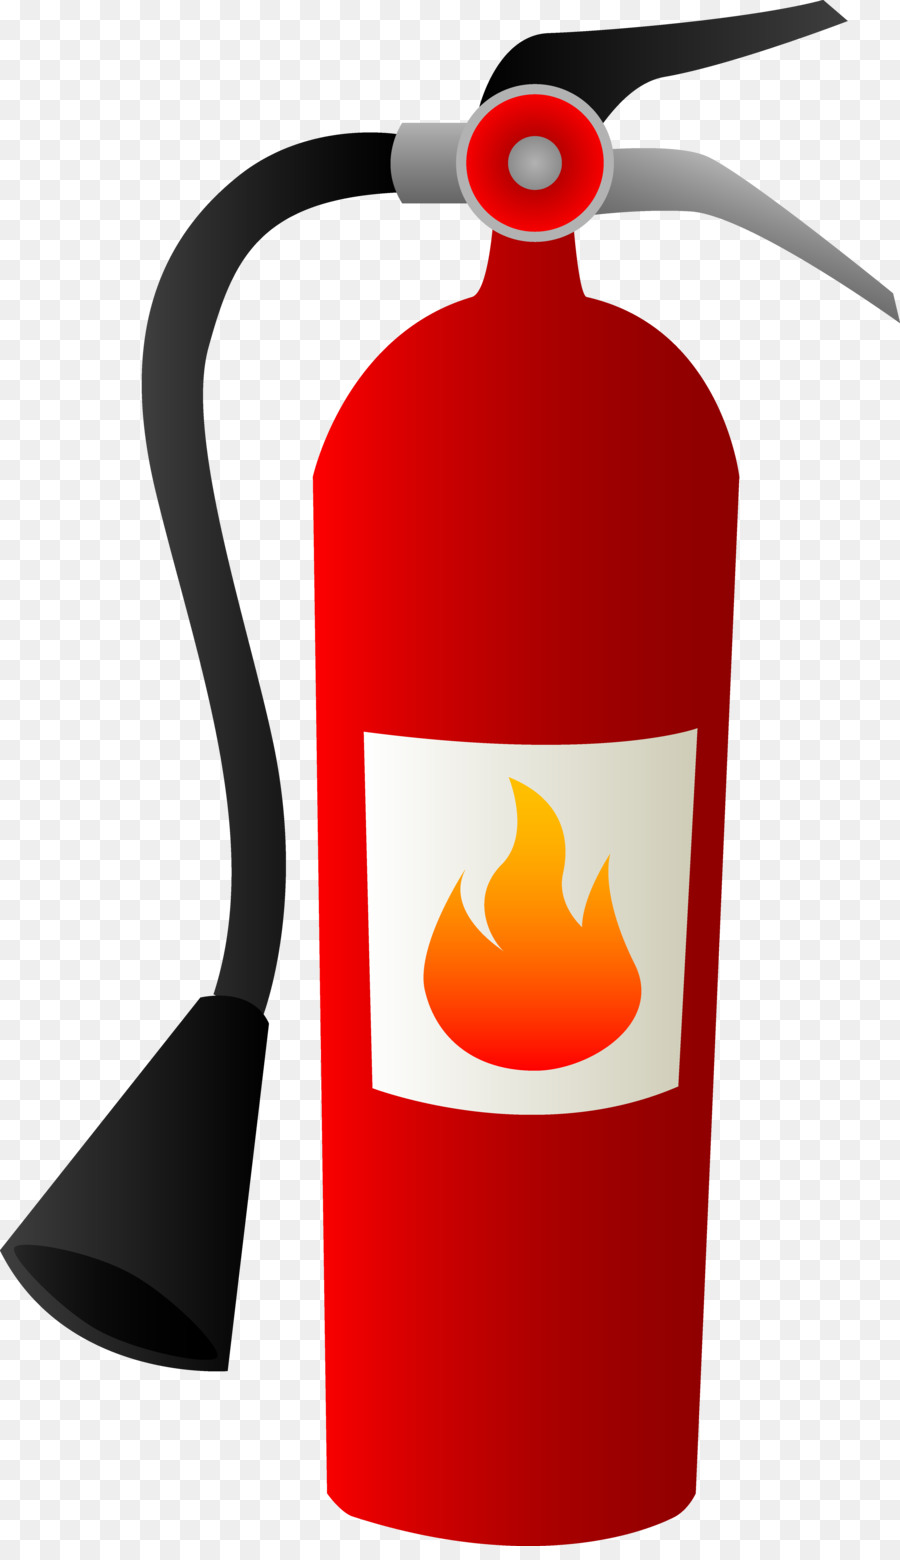 Fire Extinguisher Clipart clipart